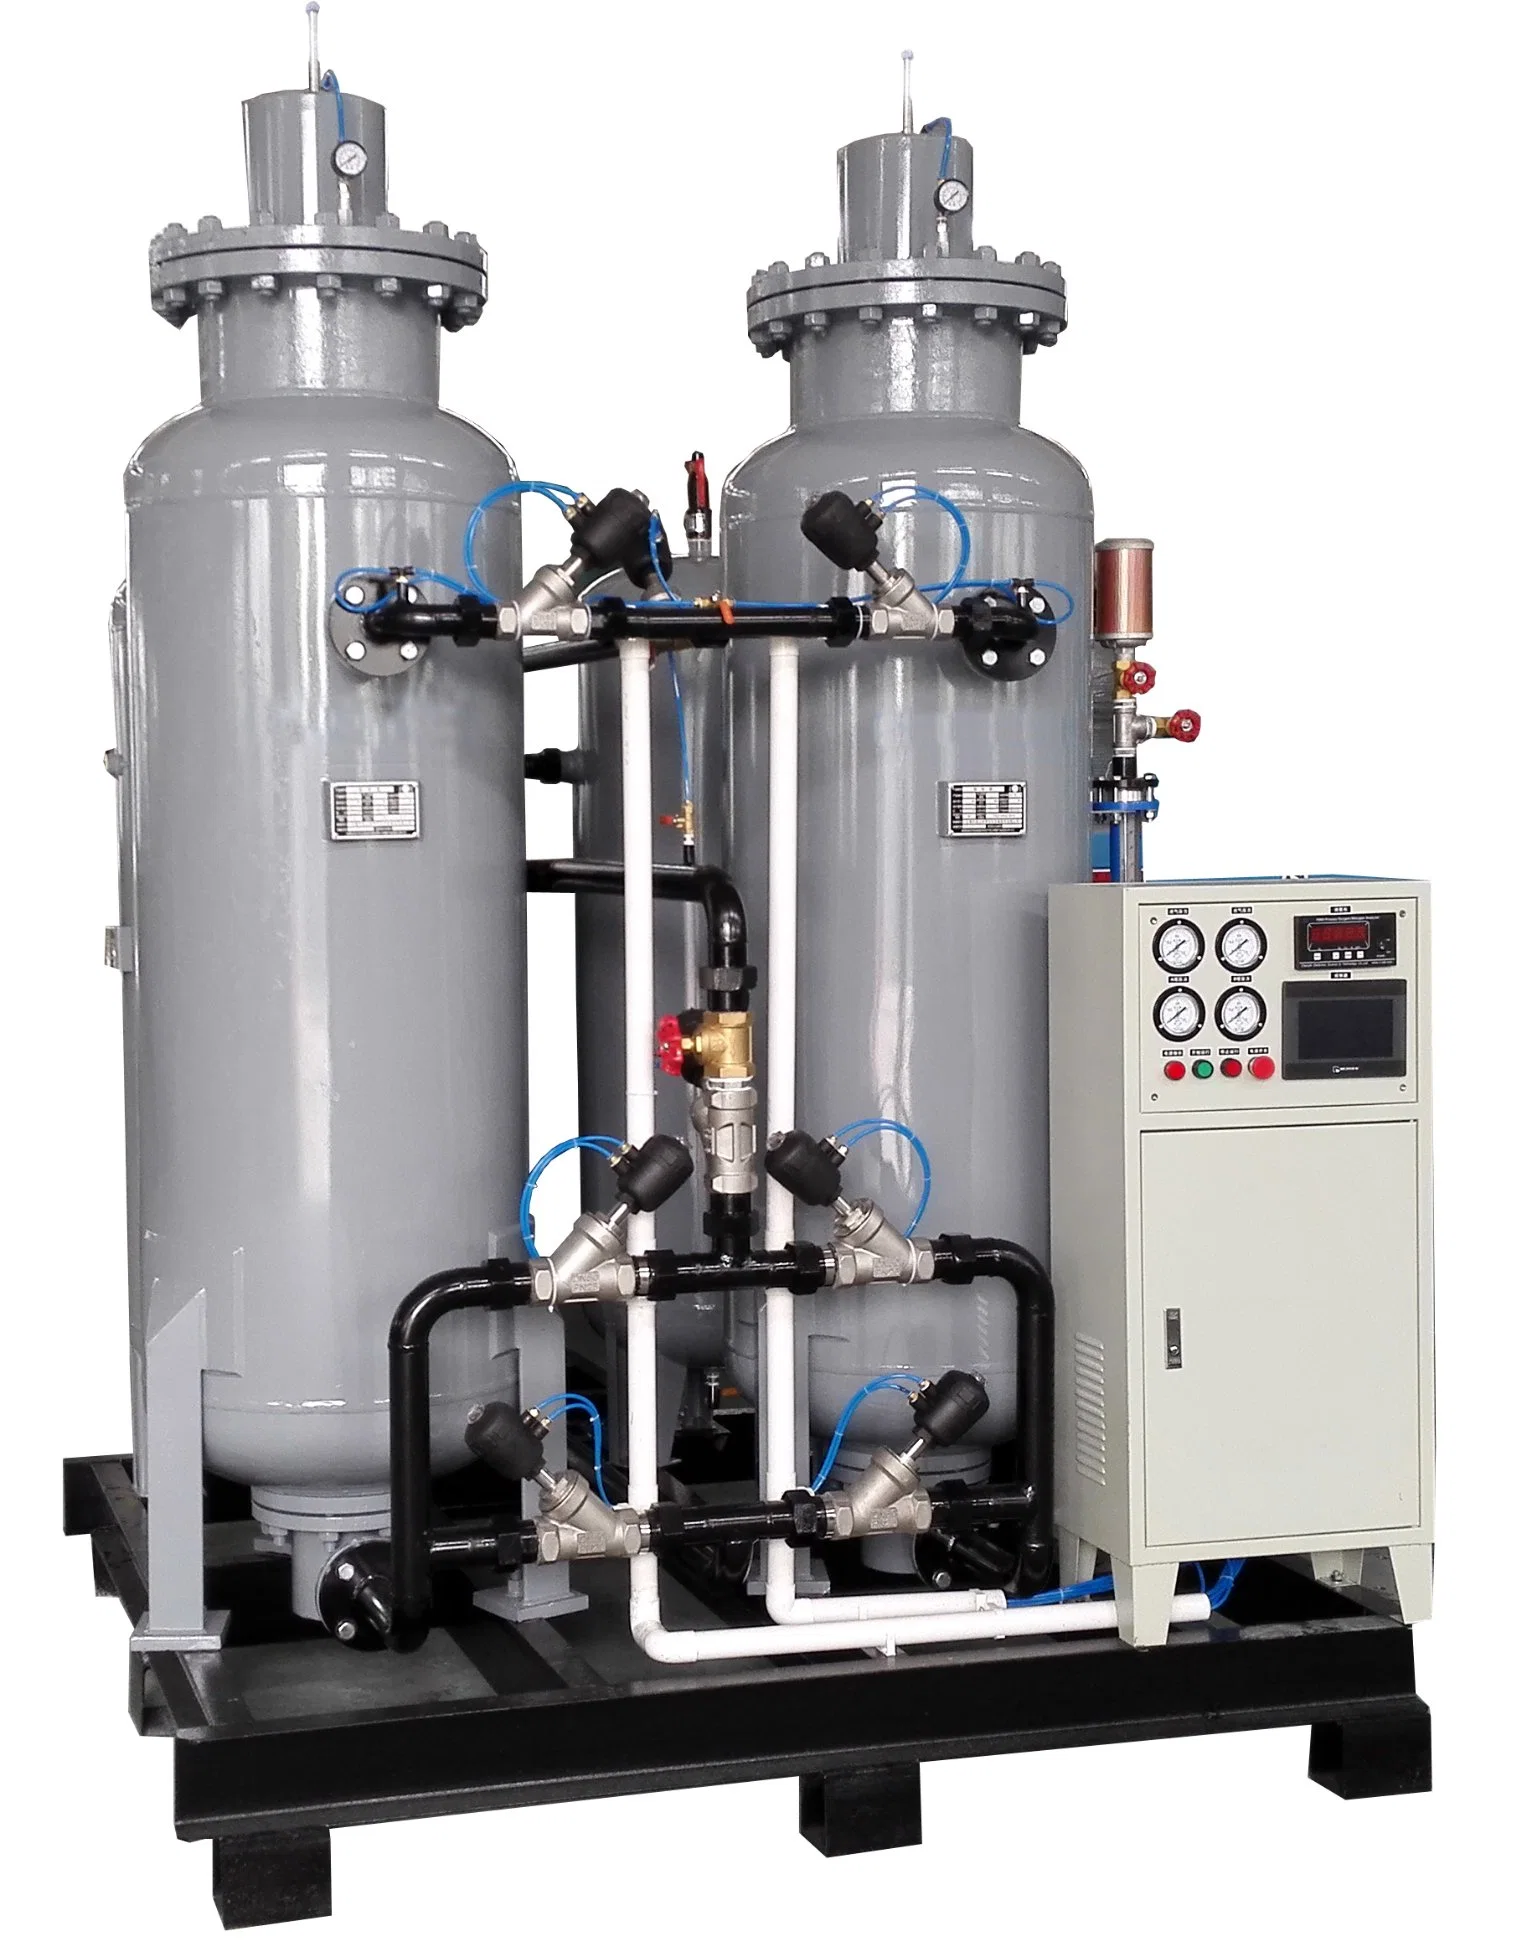 Skid-Mounted 99.999% High Purity Psa Nitrogen Generation System Gas Generator for Industry or Chemical